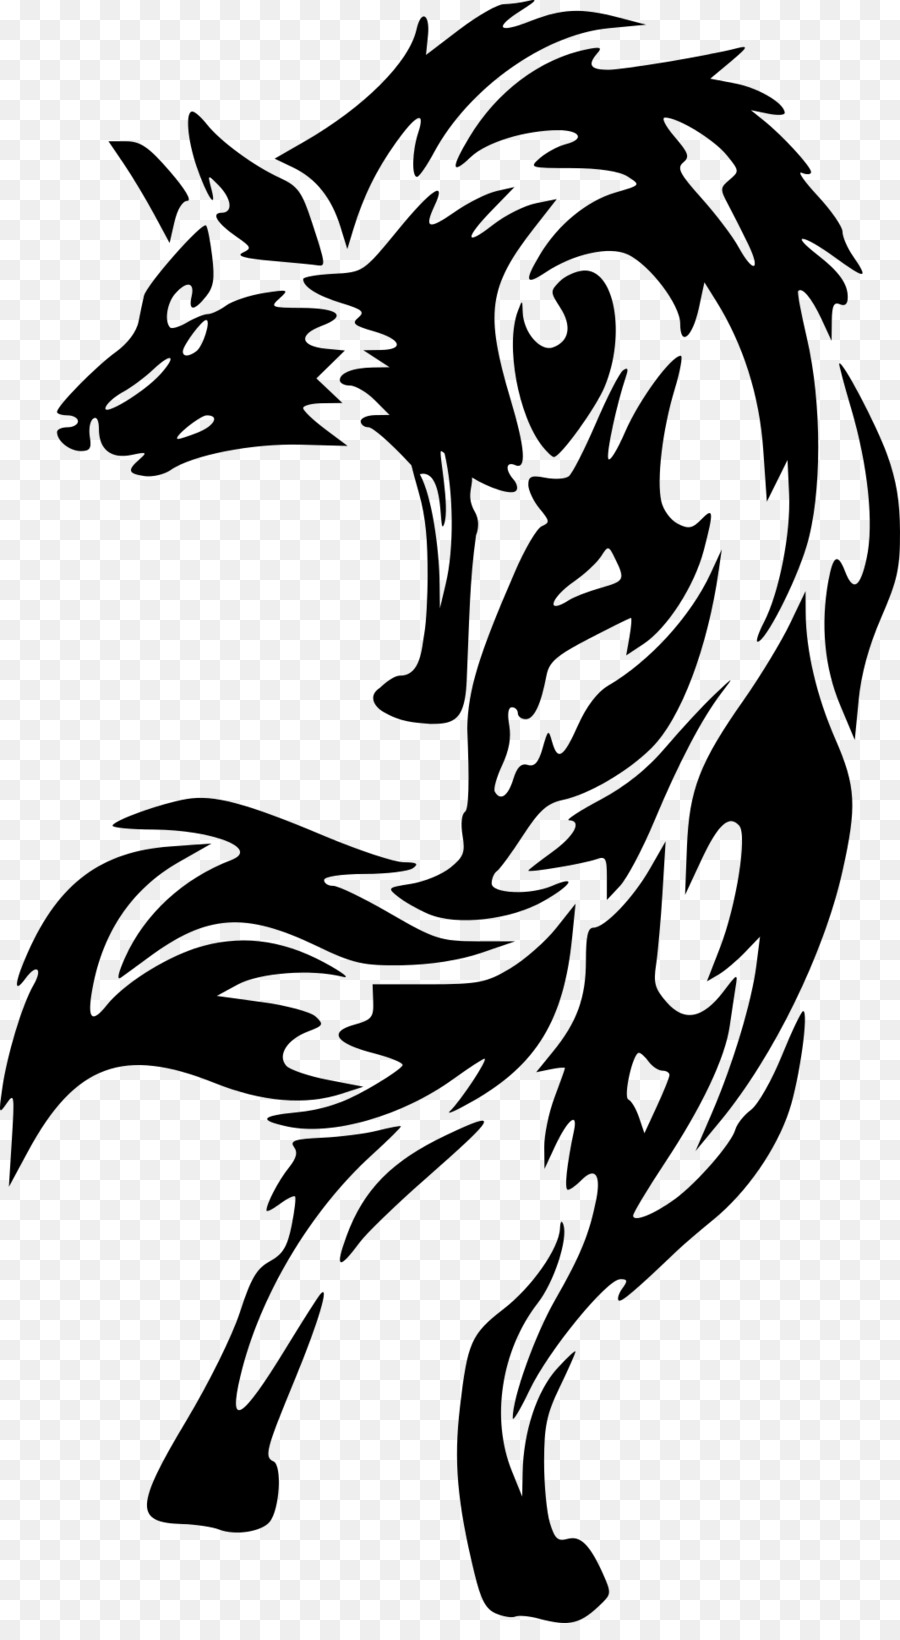 Tattoo artist Dog Pack Sleeve tattoo - wolf png download - 1065*1920 - Free Transparent Tattoo png Download.